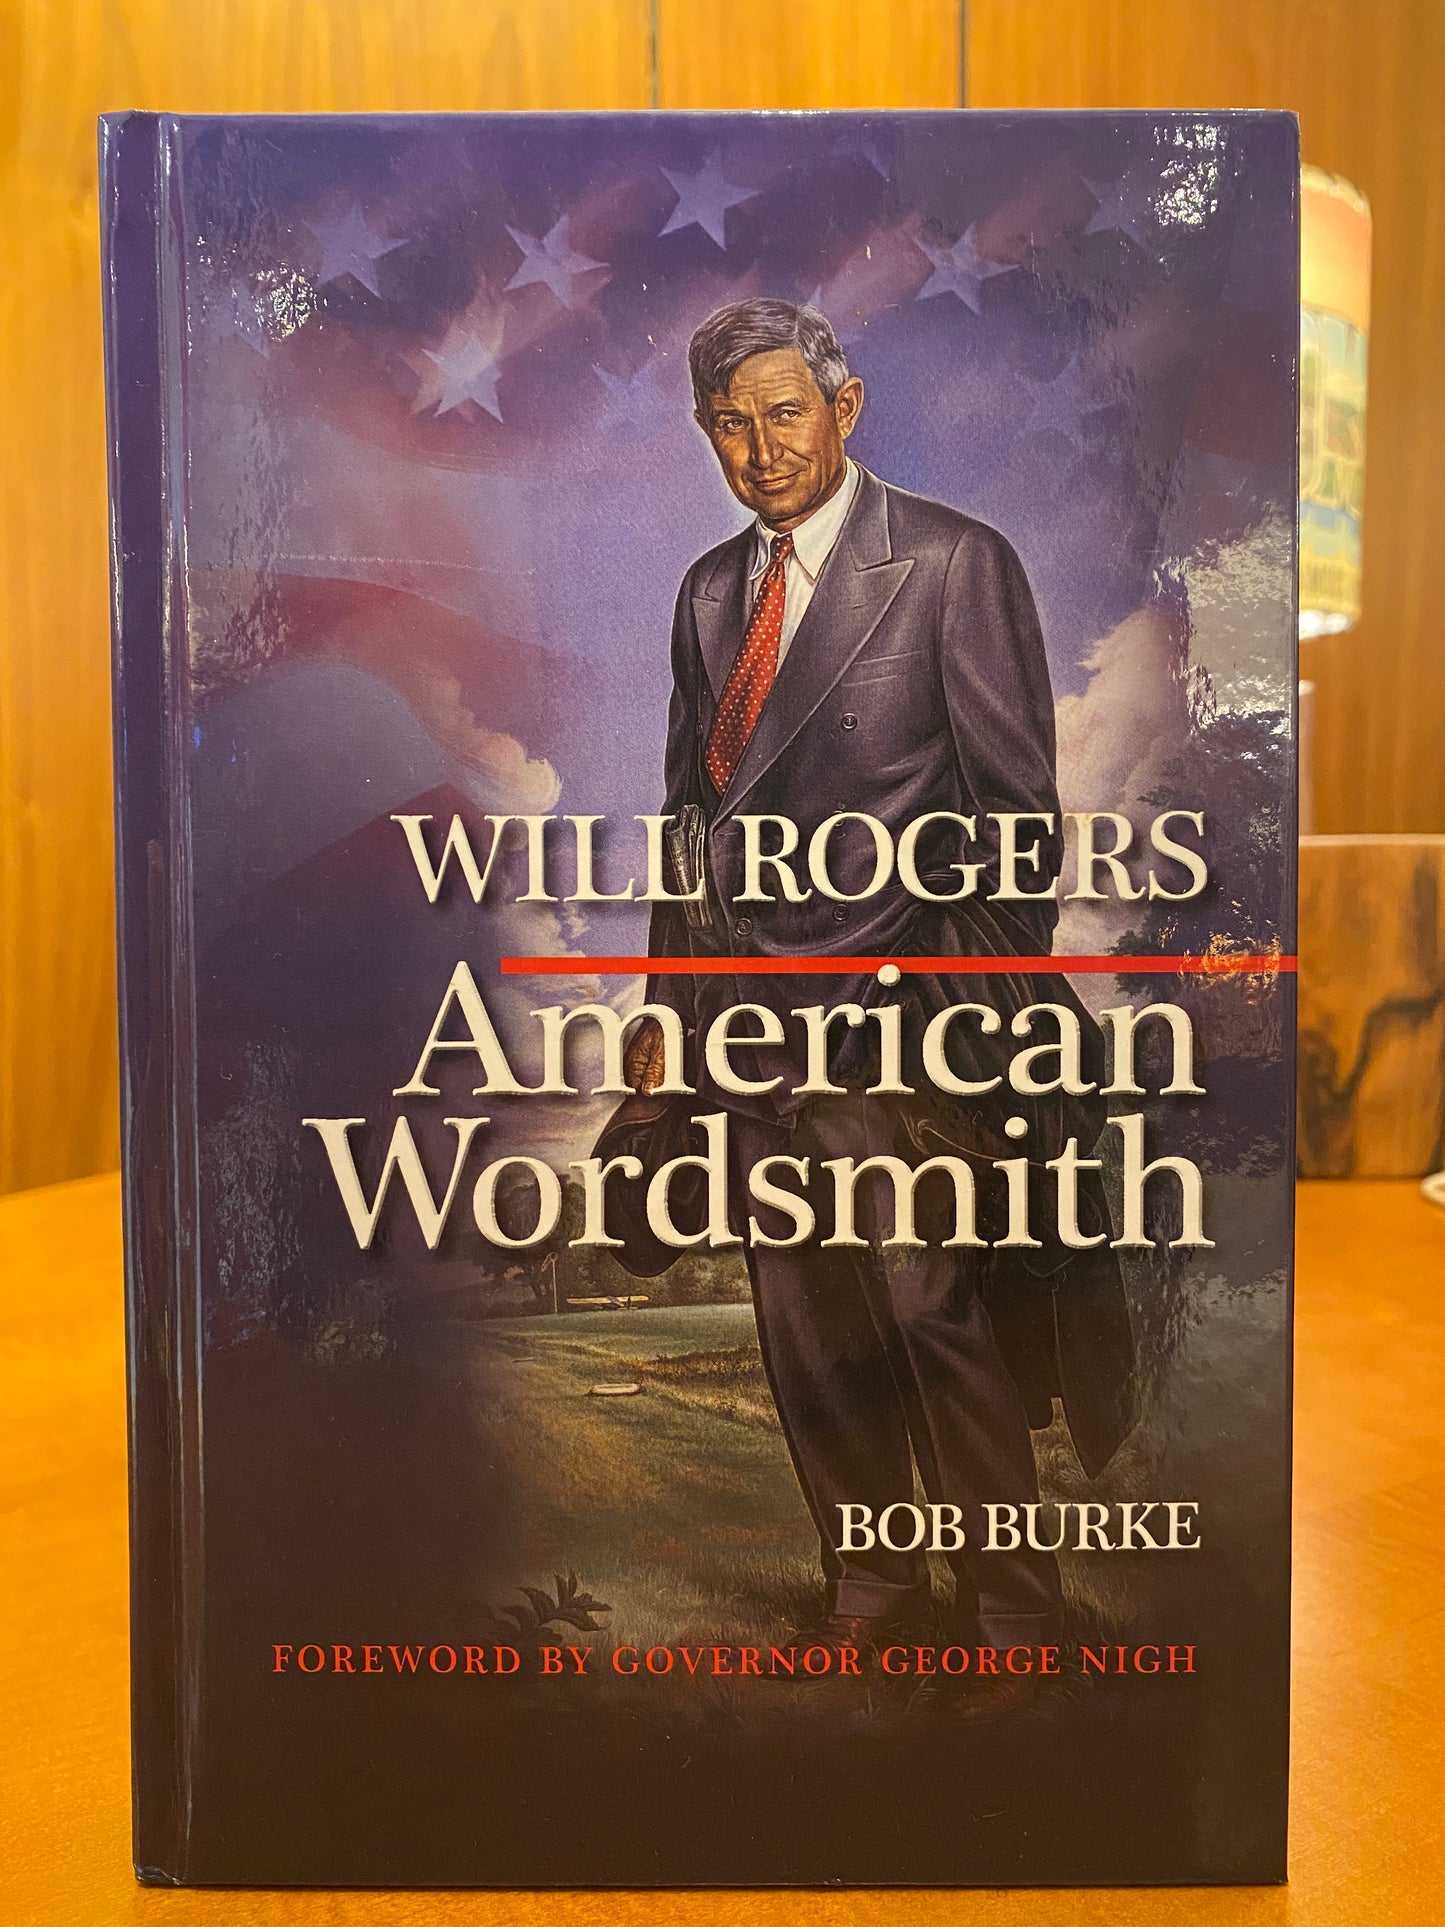 Will Rogers American Wordsmith